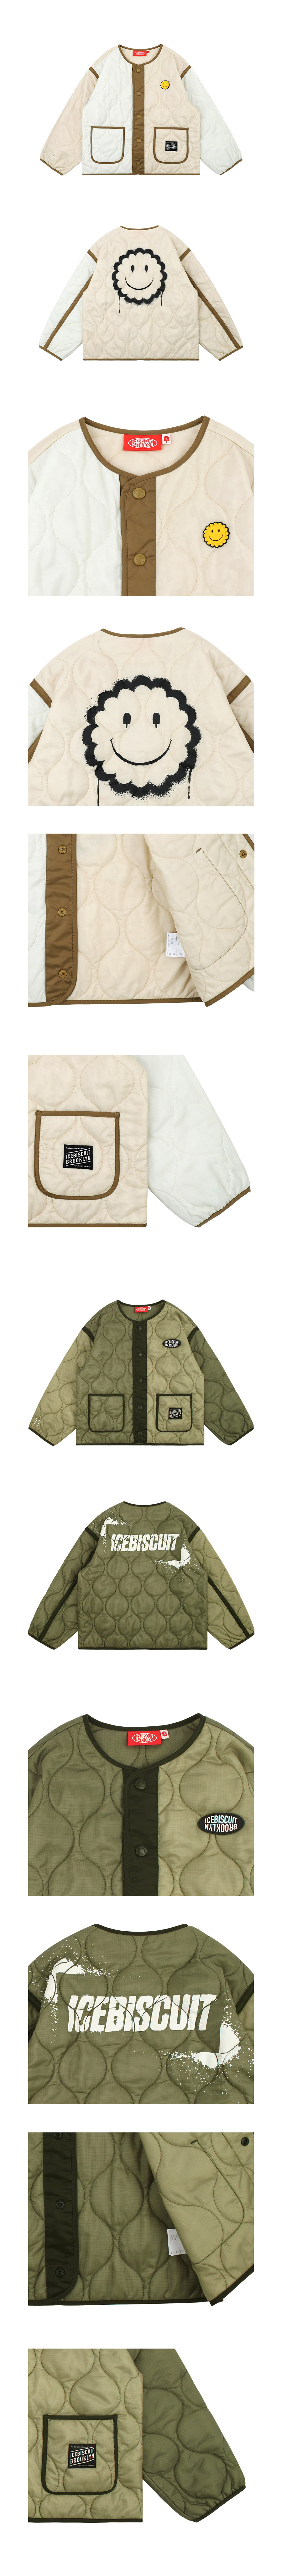 Icebiscuit graffiti quilted jacket 상세 이미지